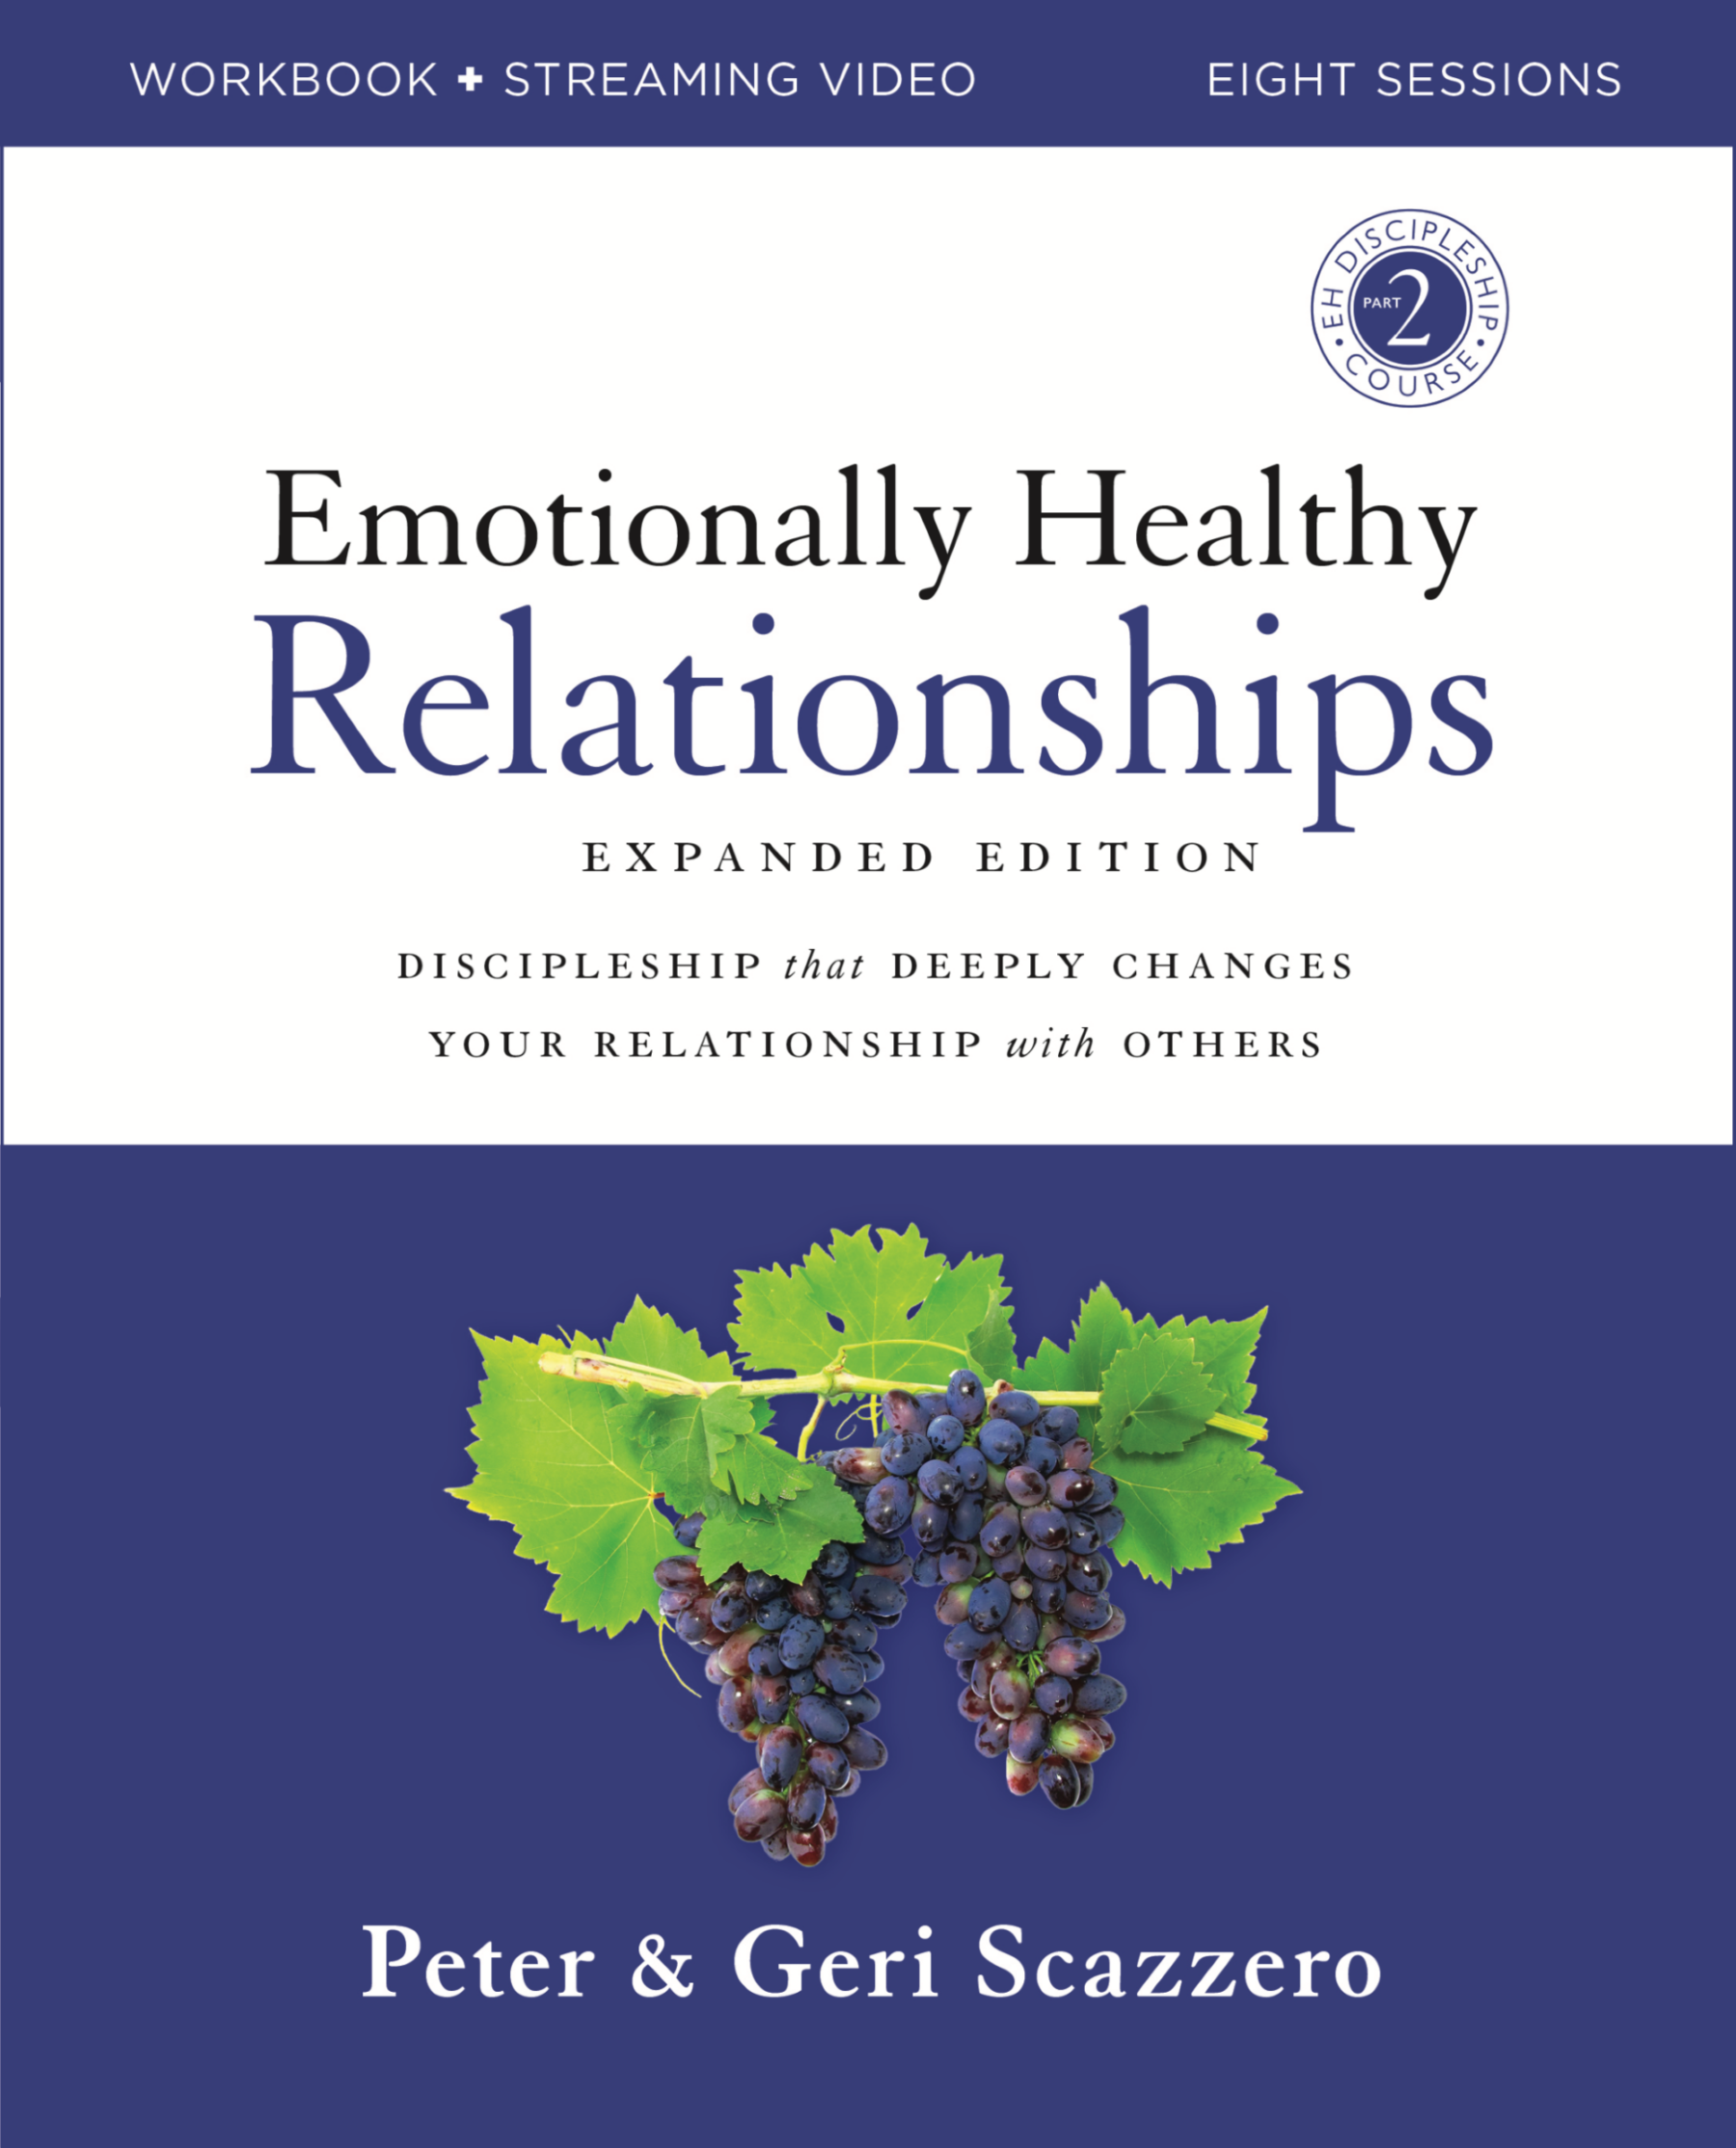 EH Relationships Expanded Workbook Product Image